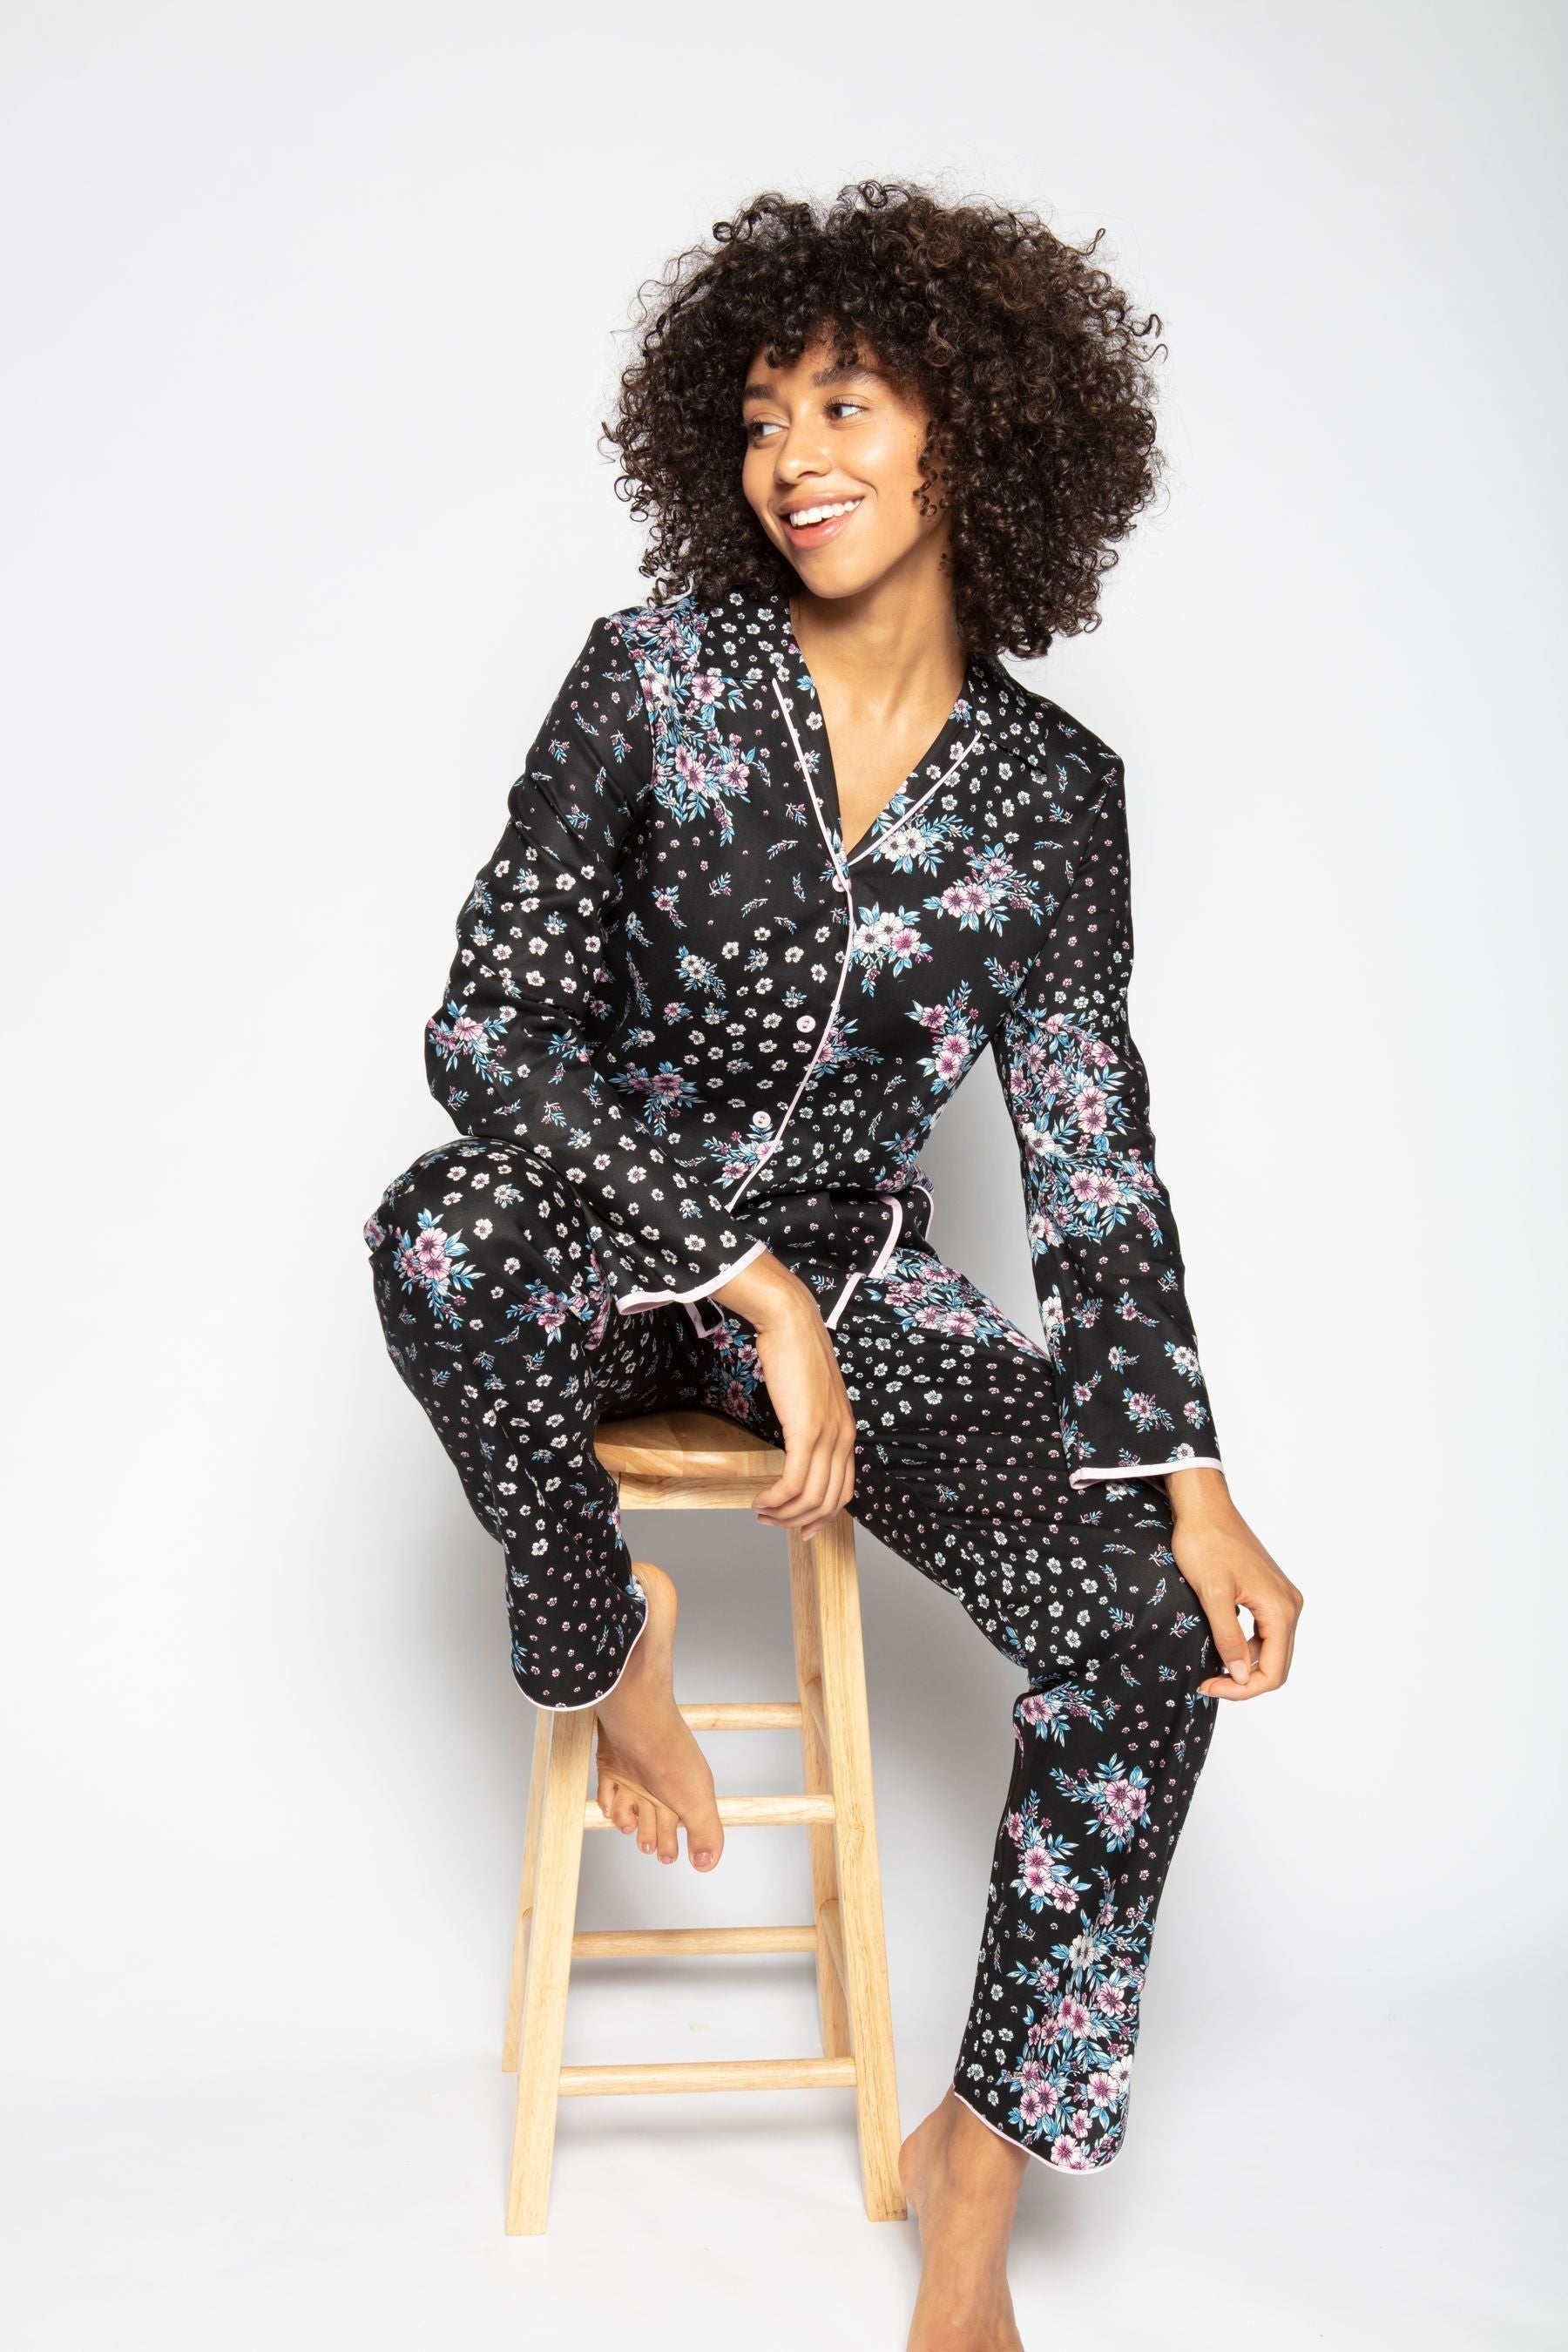 Black Color Digital Abstract Printed loungewear/Nightsuit For Women With Pants.